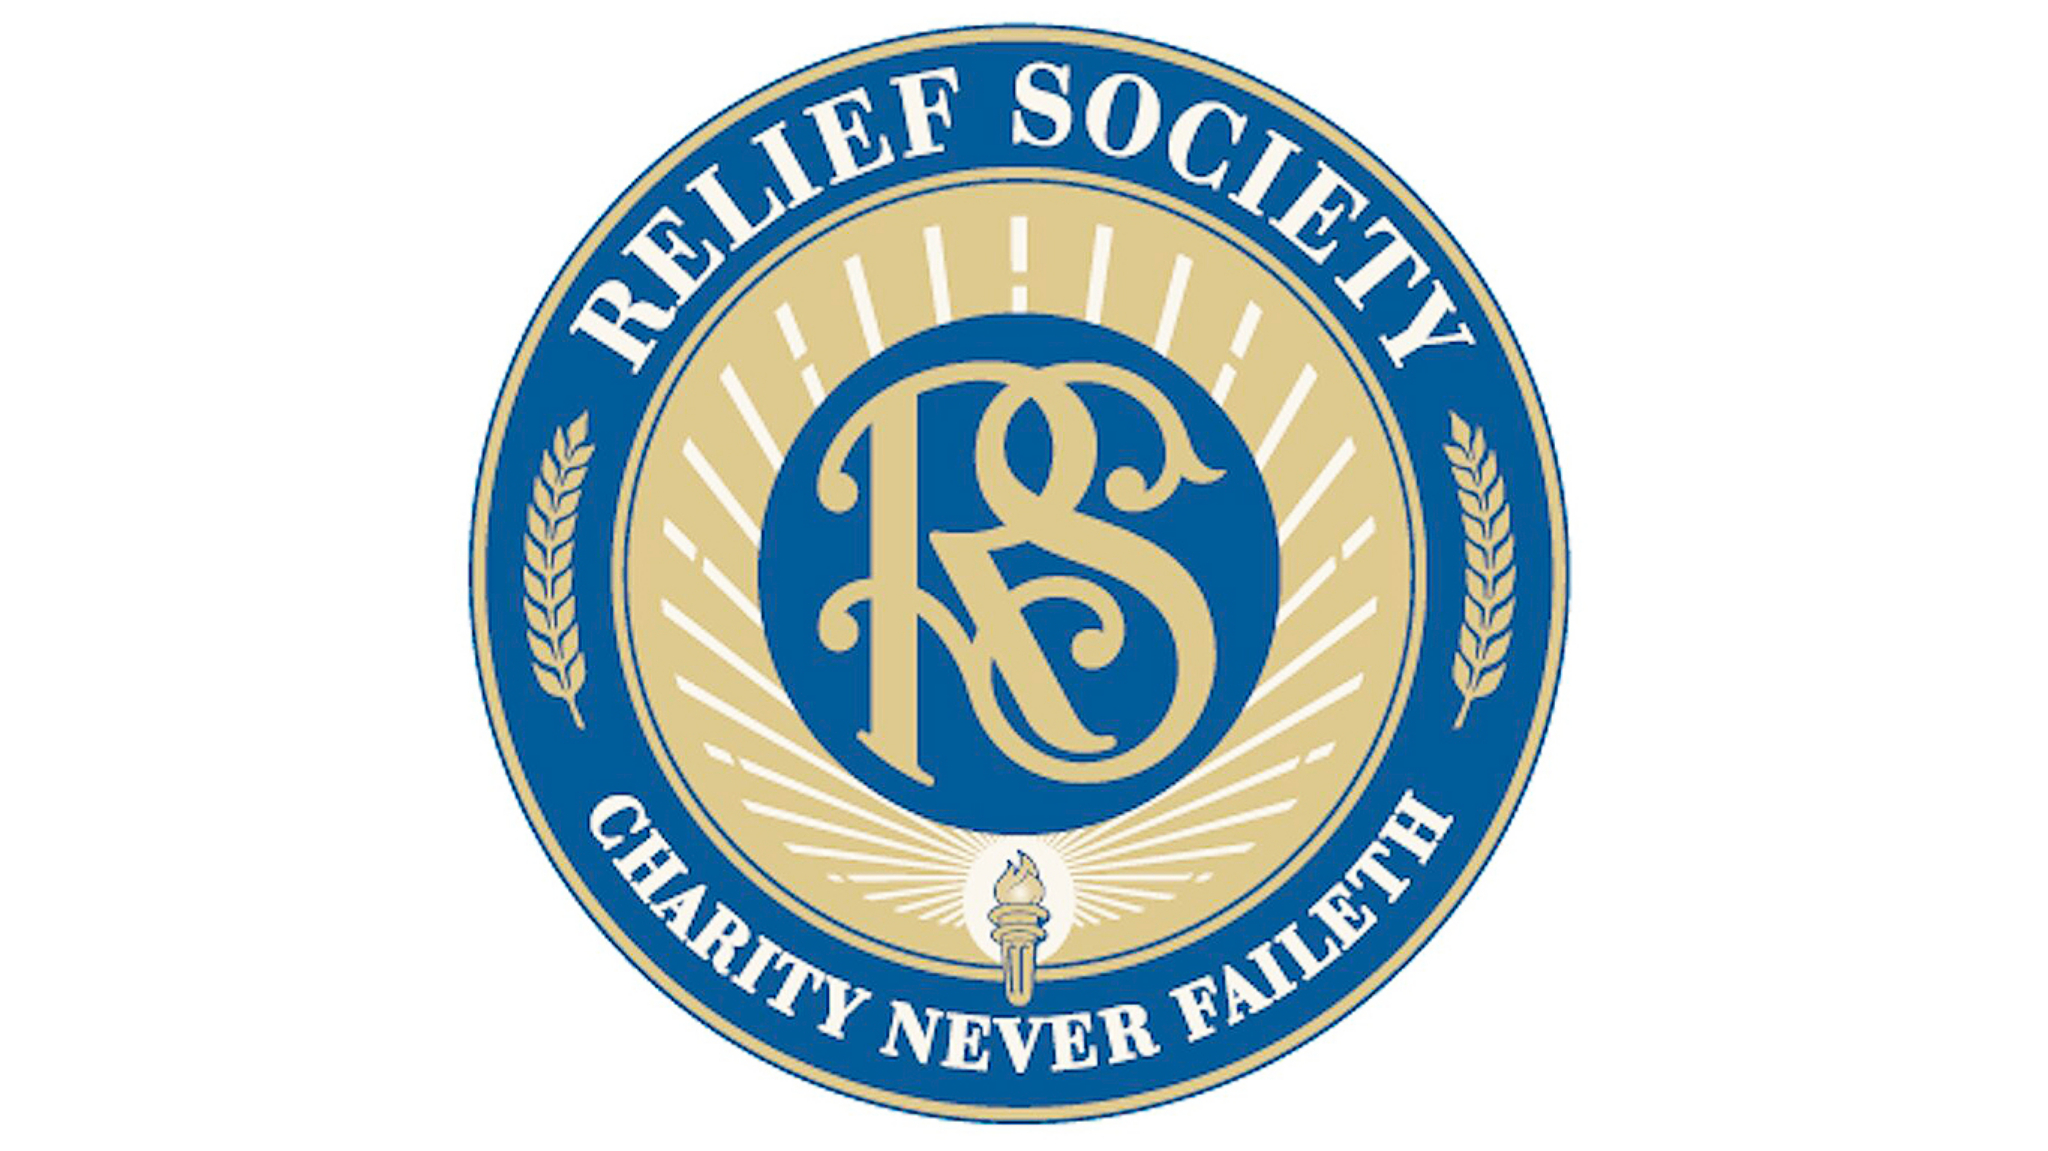 Relief Society Prepares for 180th Anniversary by Issuing Invitation to